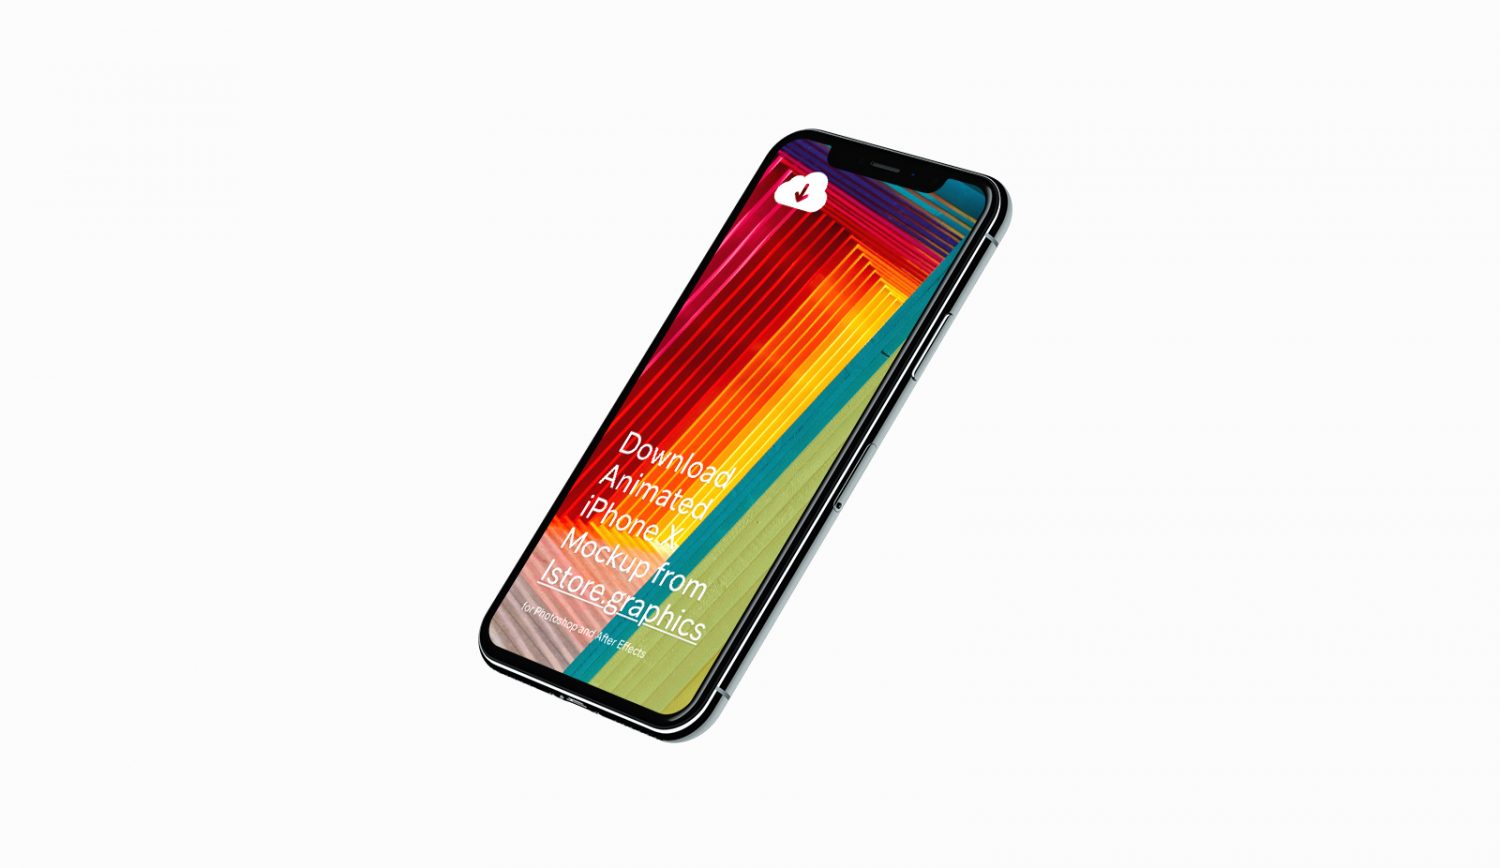 Download 8 Free iPhone X Mockups for Sketch and Photoshop - Best Free Mockups